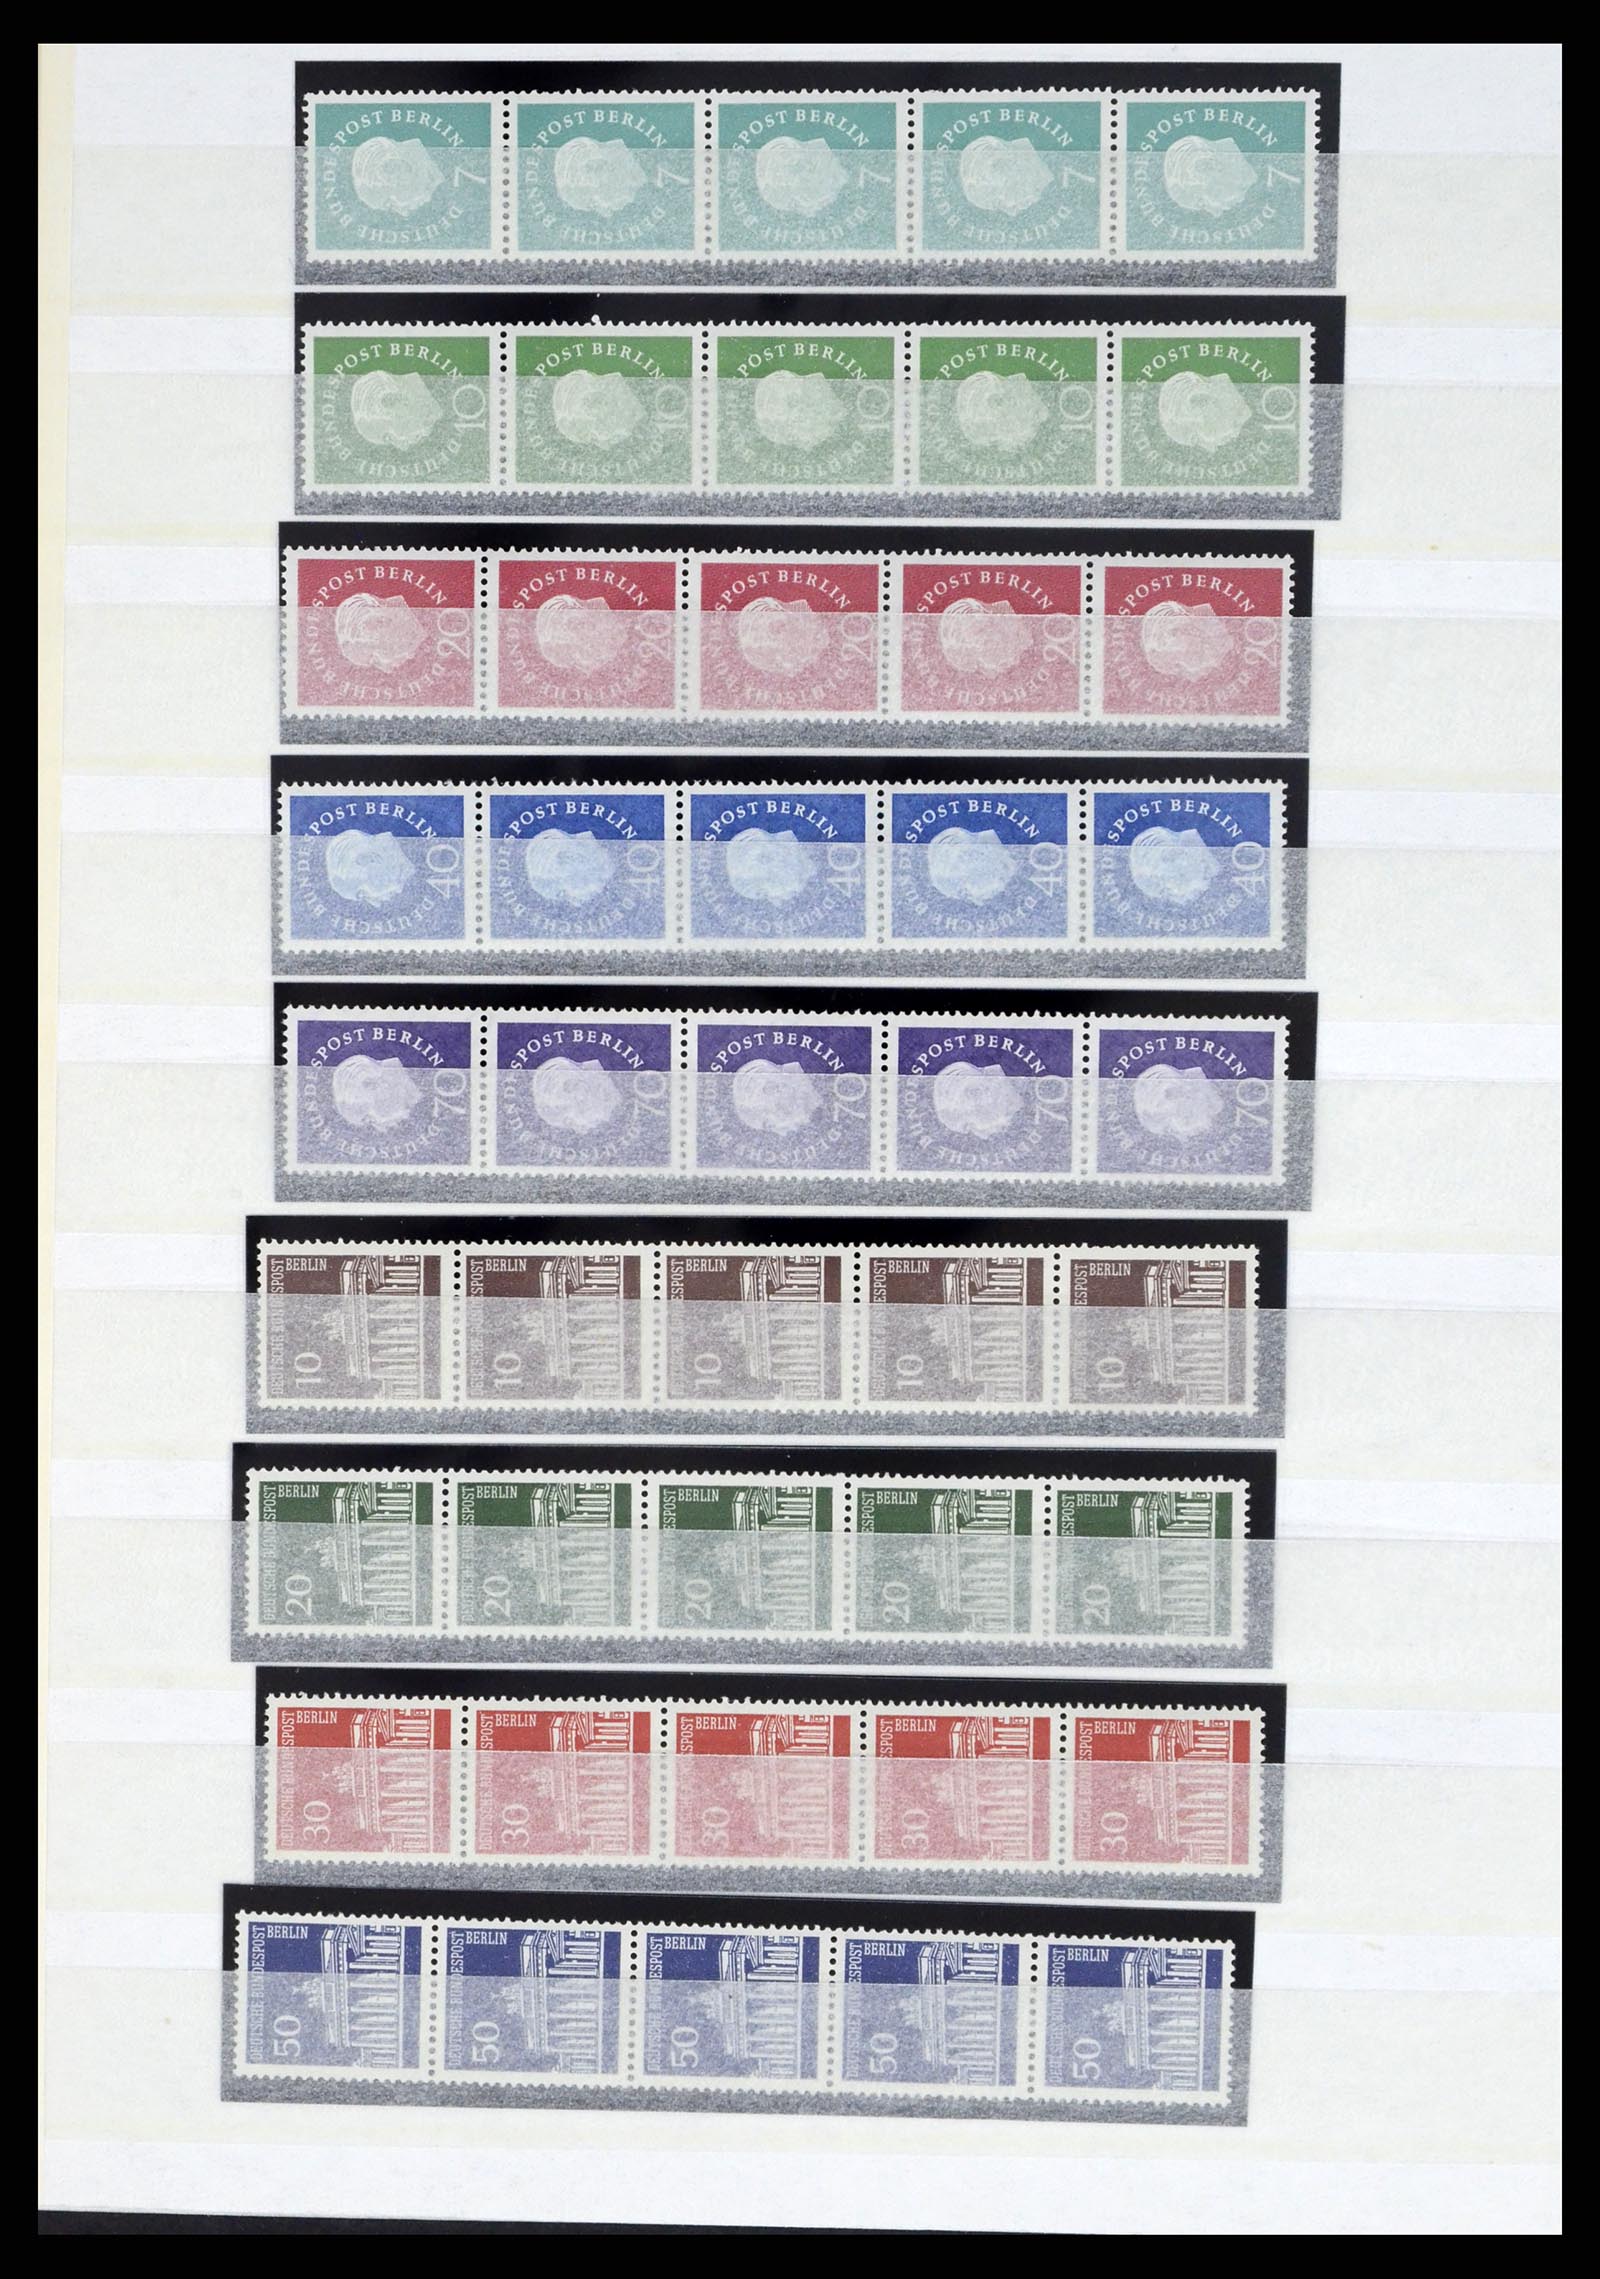 37354 097 - Stamp collection 37354 Bundespost and Berlin 1955-2000.